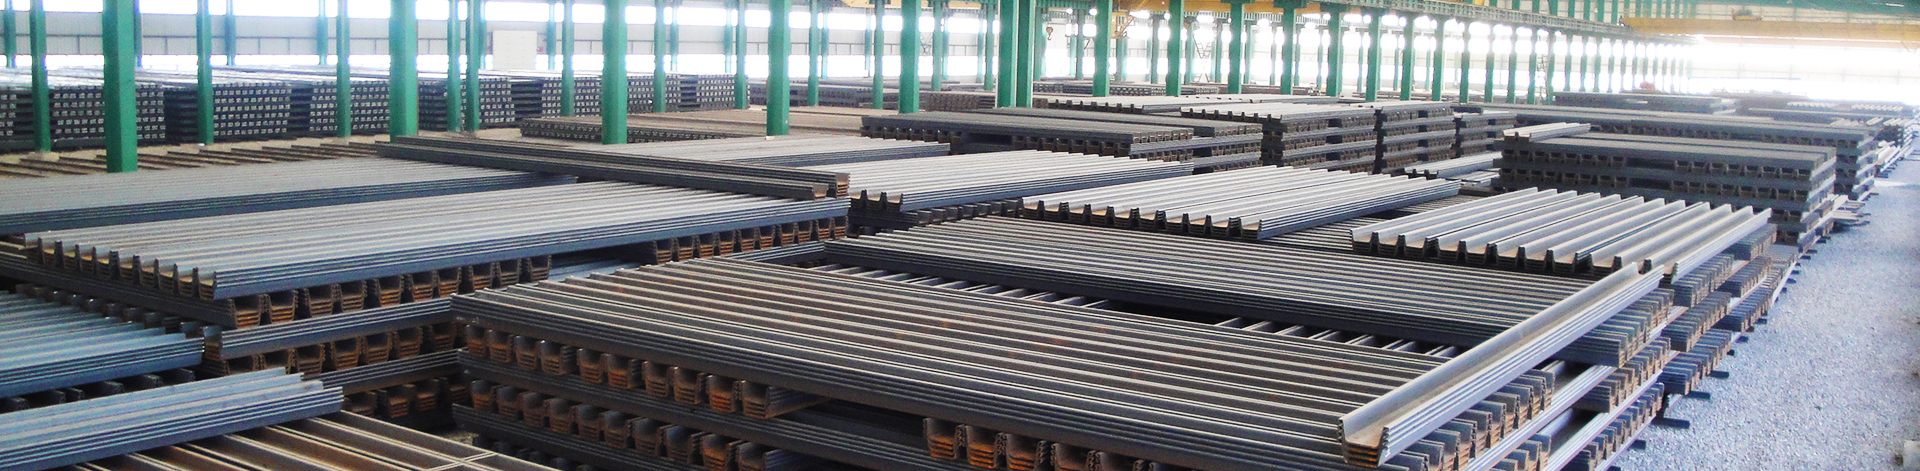 Hot rolled angle steel